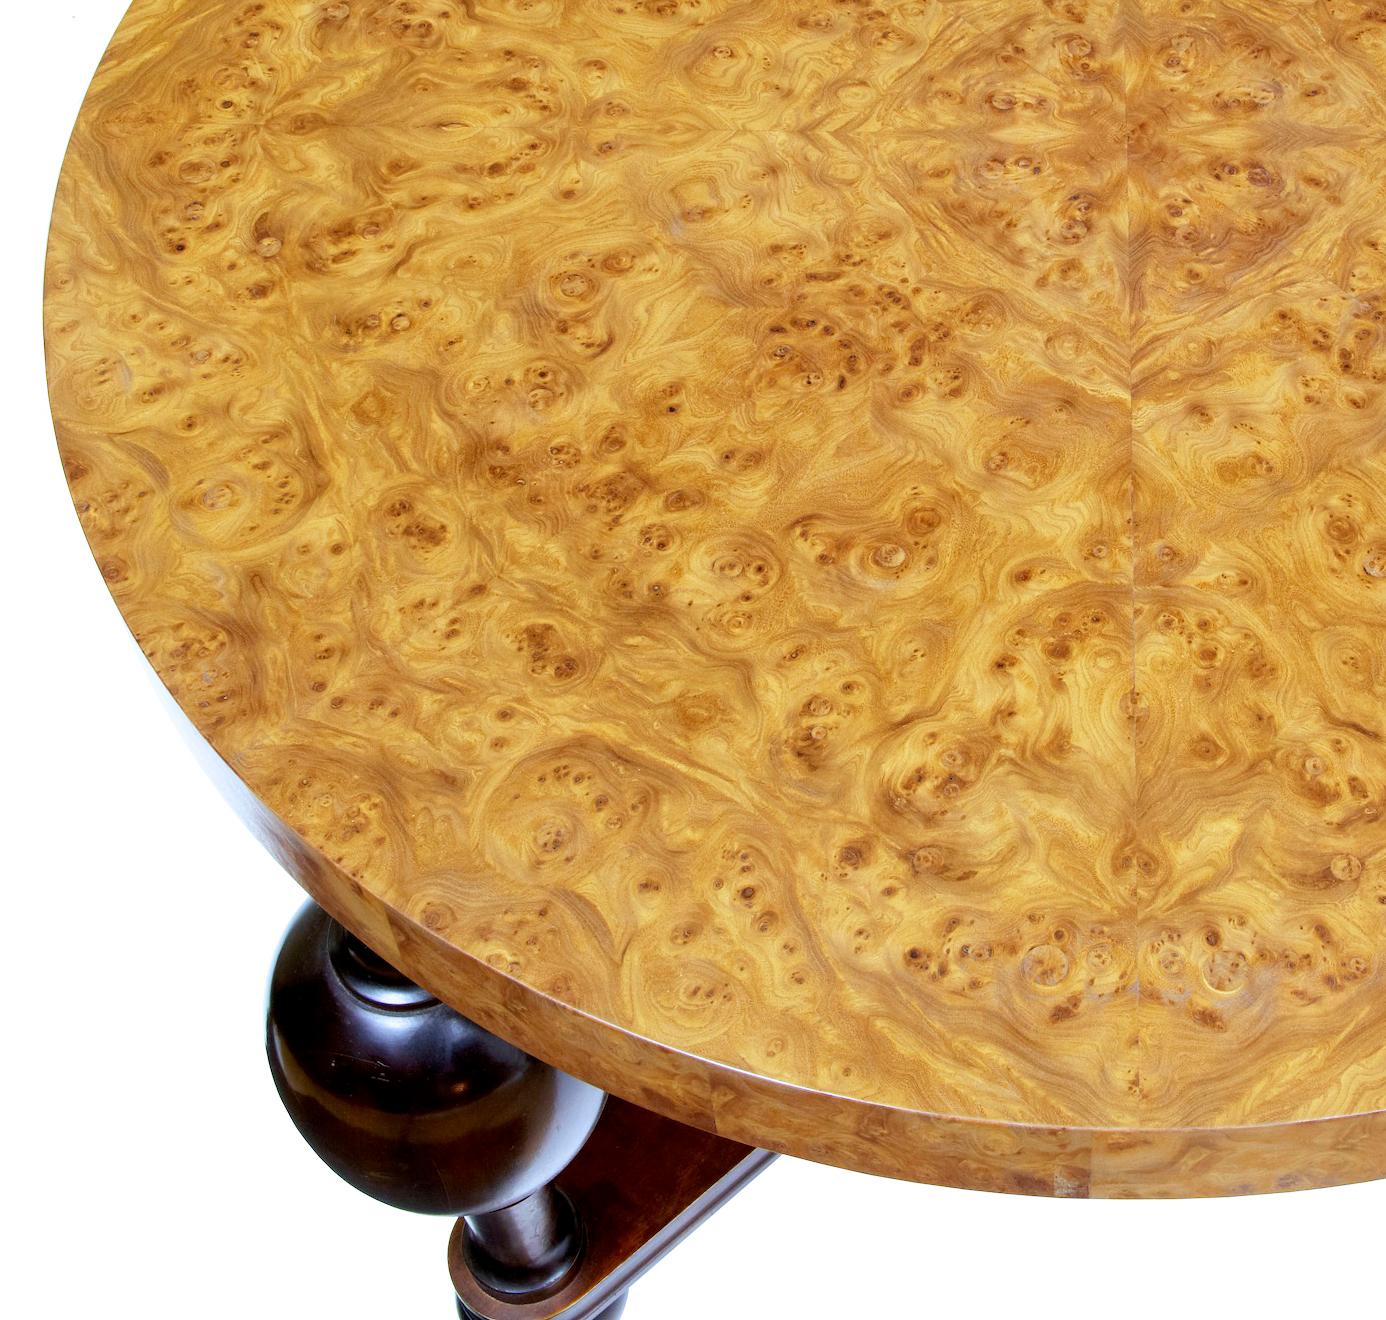 Art Deco burr elm coffee table circa 1930.

Thick circular top veneered in stunning burr elm quarter veneered so its in a repeating pattern. Standing on dark stained bulbous turned legs united by a x frame stretcher.

Minor surface marks.